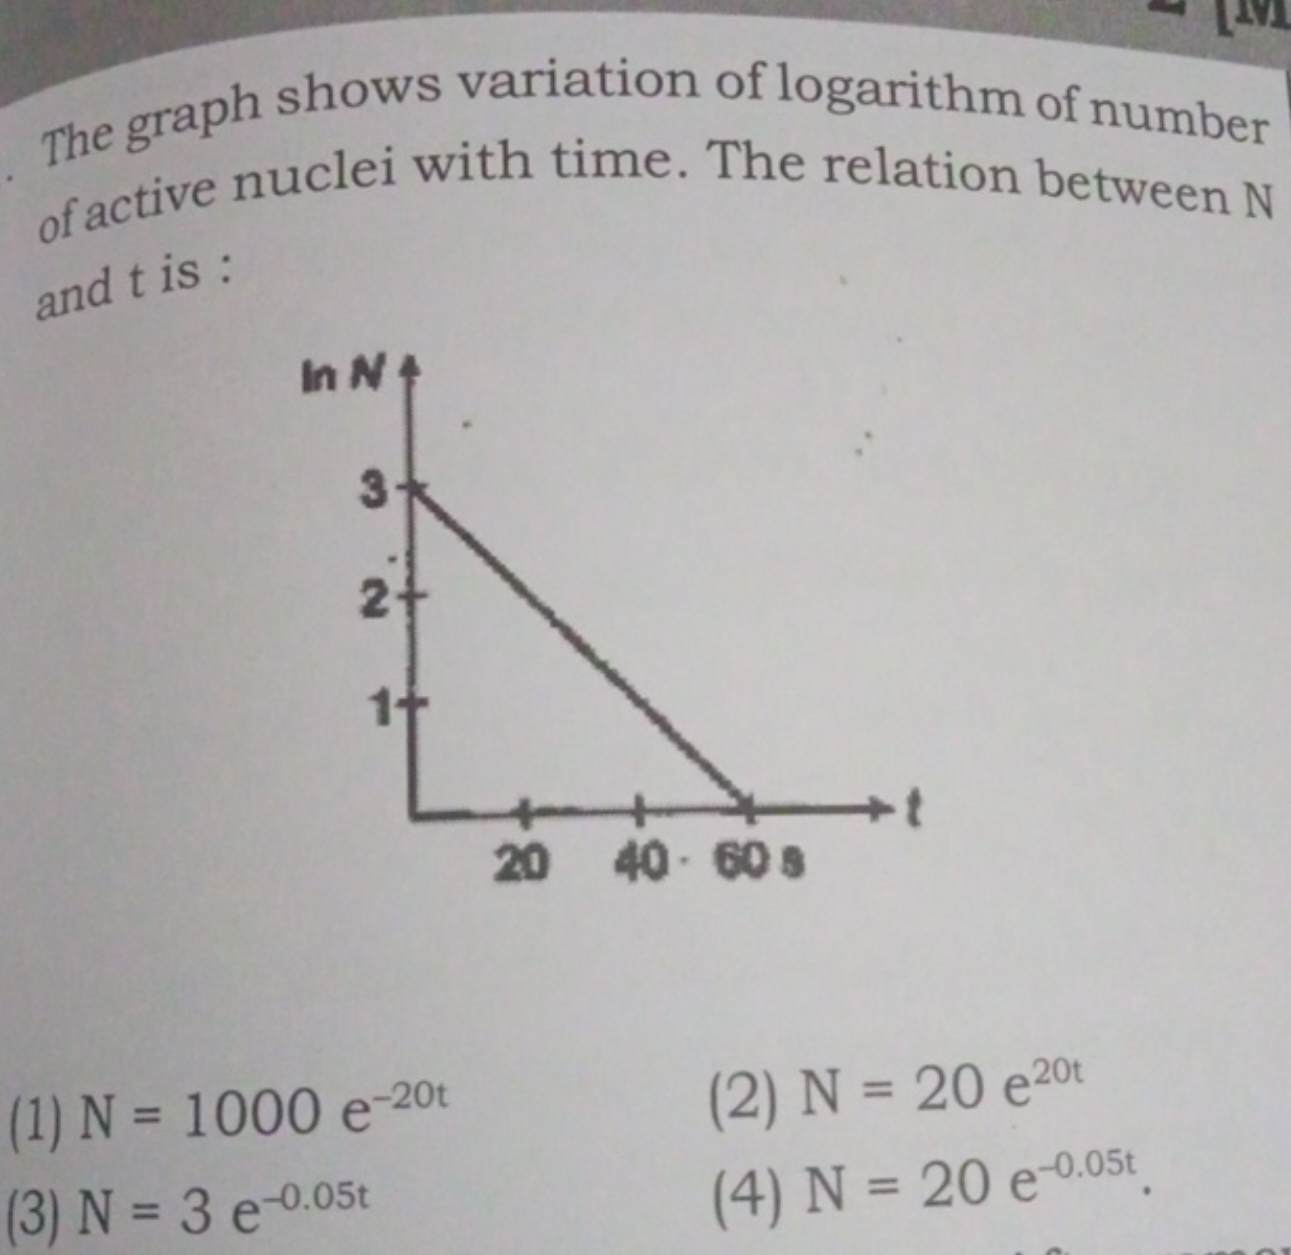 The graph shows variation of logarithm of number of active nuclei with